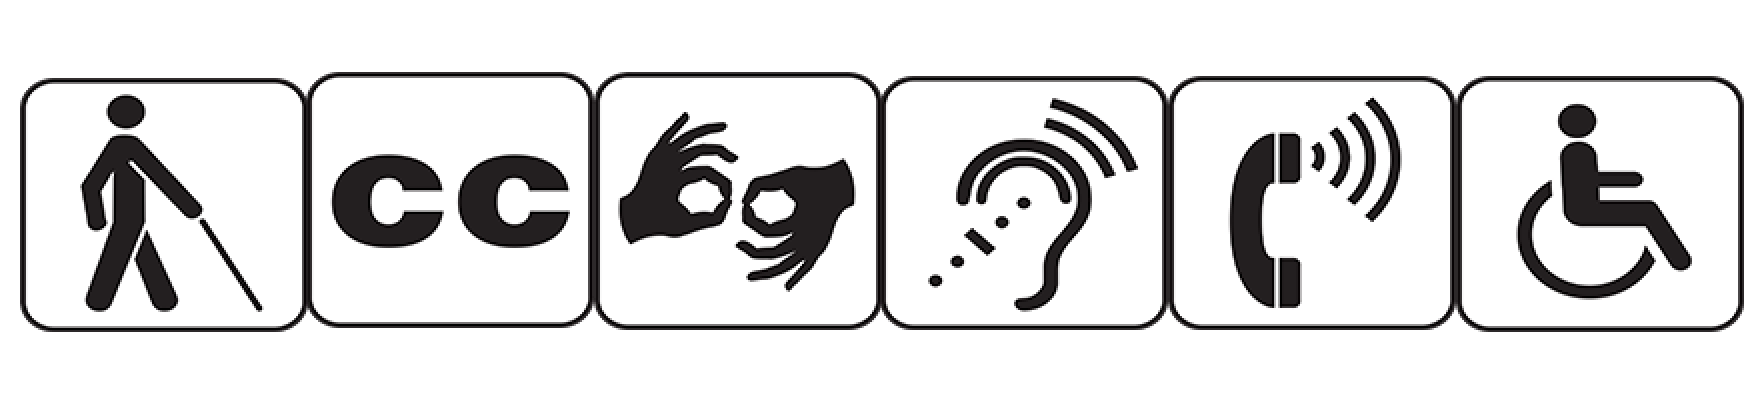 Disability icons; person with cane, closed captioning, sign language, hear symbol, phone symbol and wheelchair symbol.